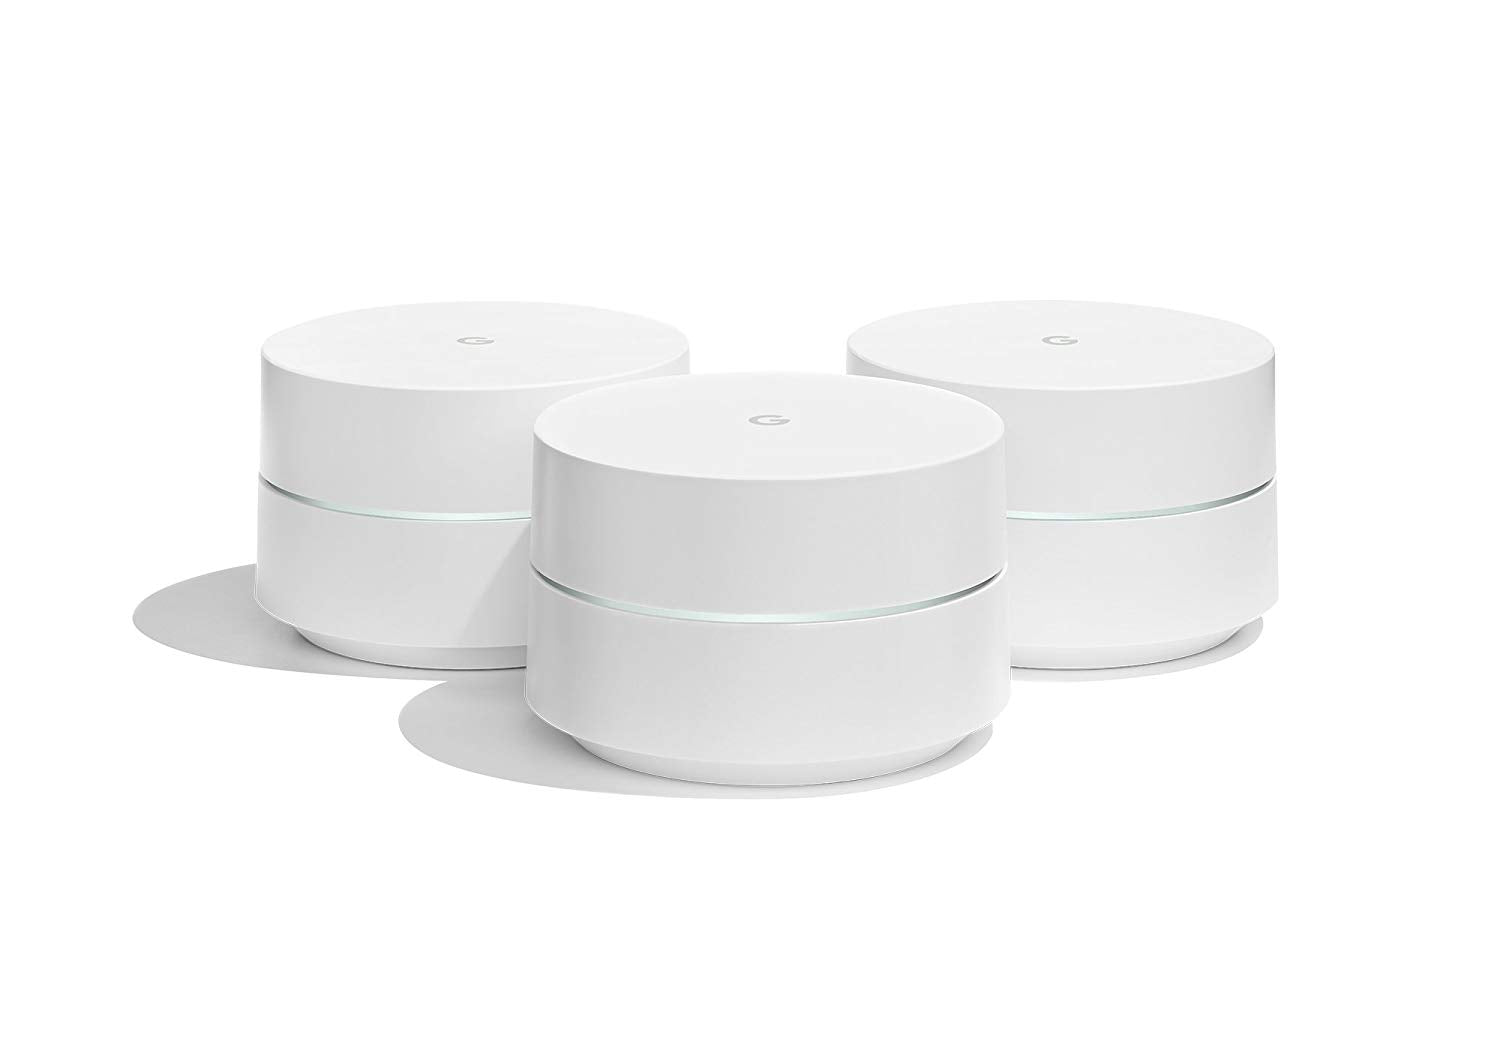 Google WiFi system, 3-Pack - Router for whole home coverage